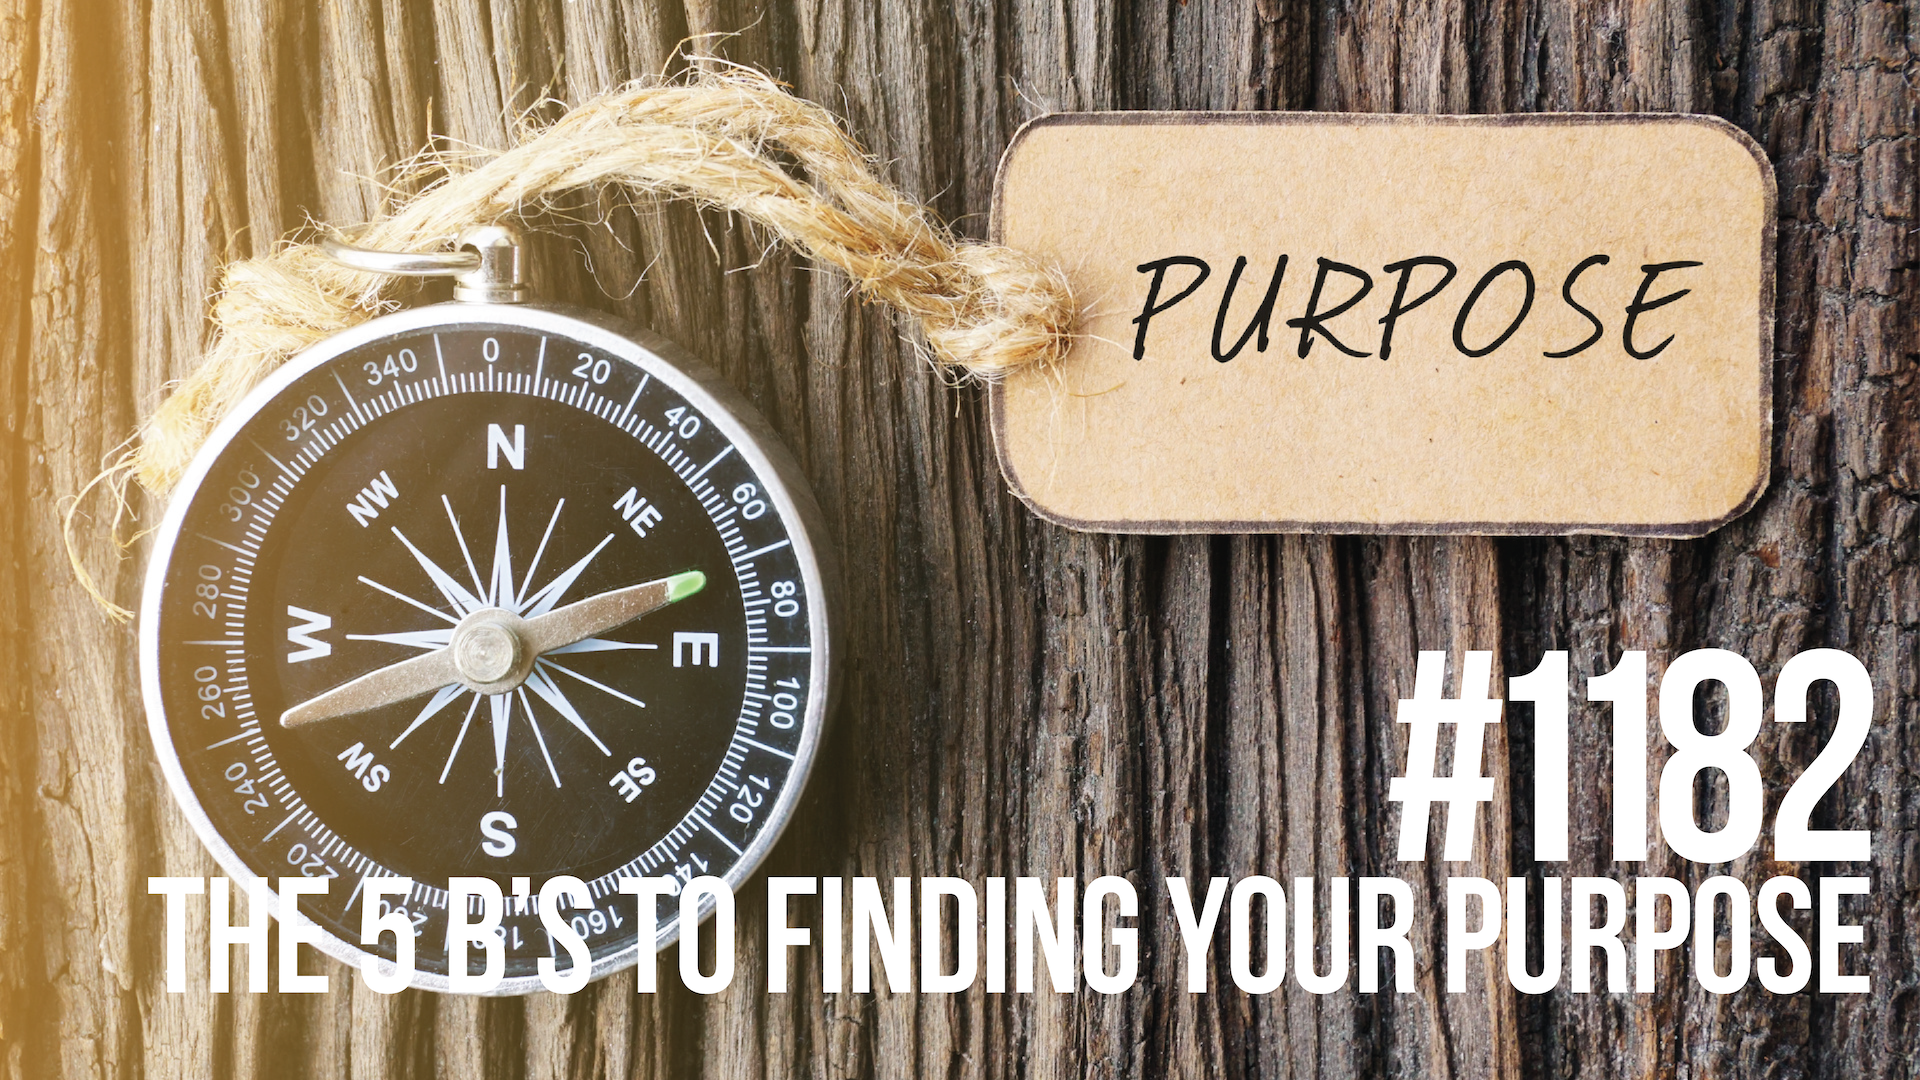 1182: The 5 B’s to Finding Your Purpose